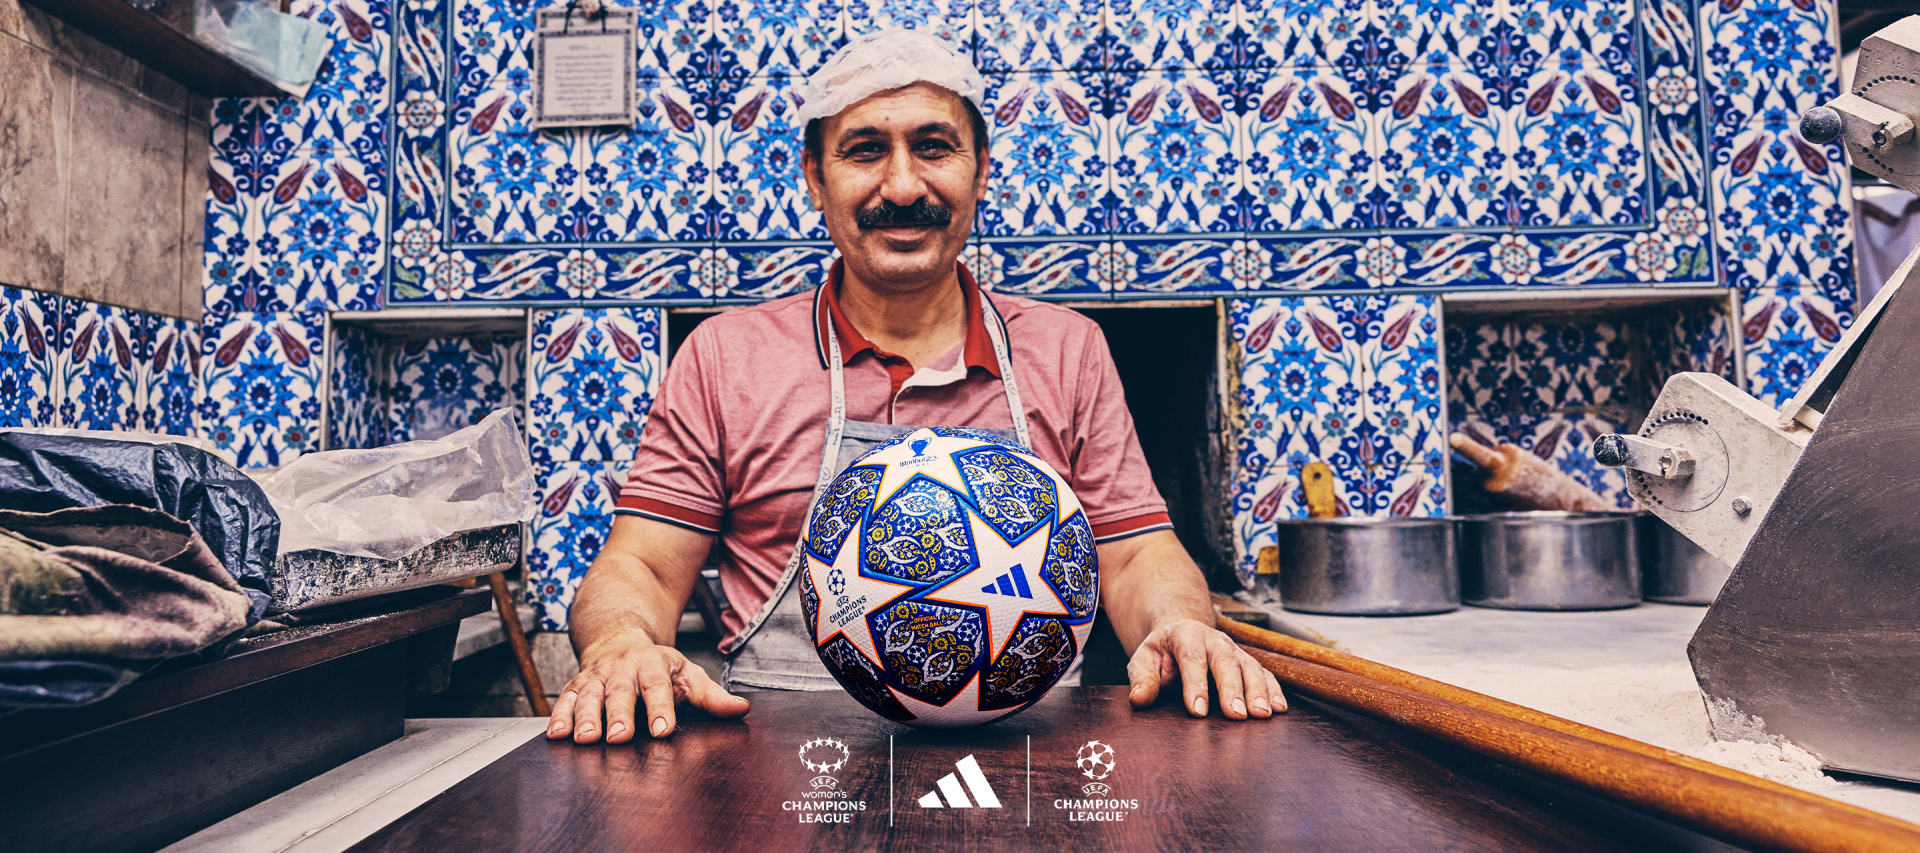 Visual of the UEFA Champions league official match ball in an Istanbul bakery